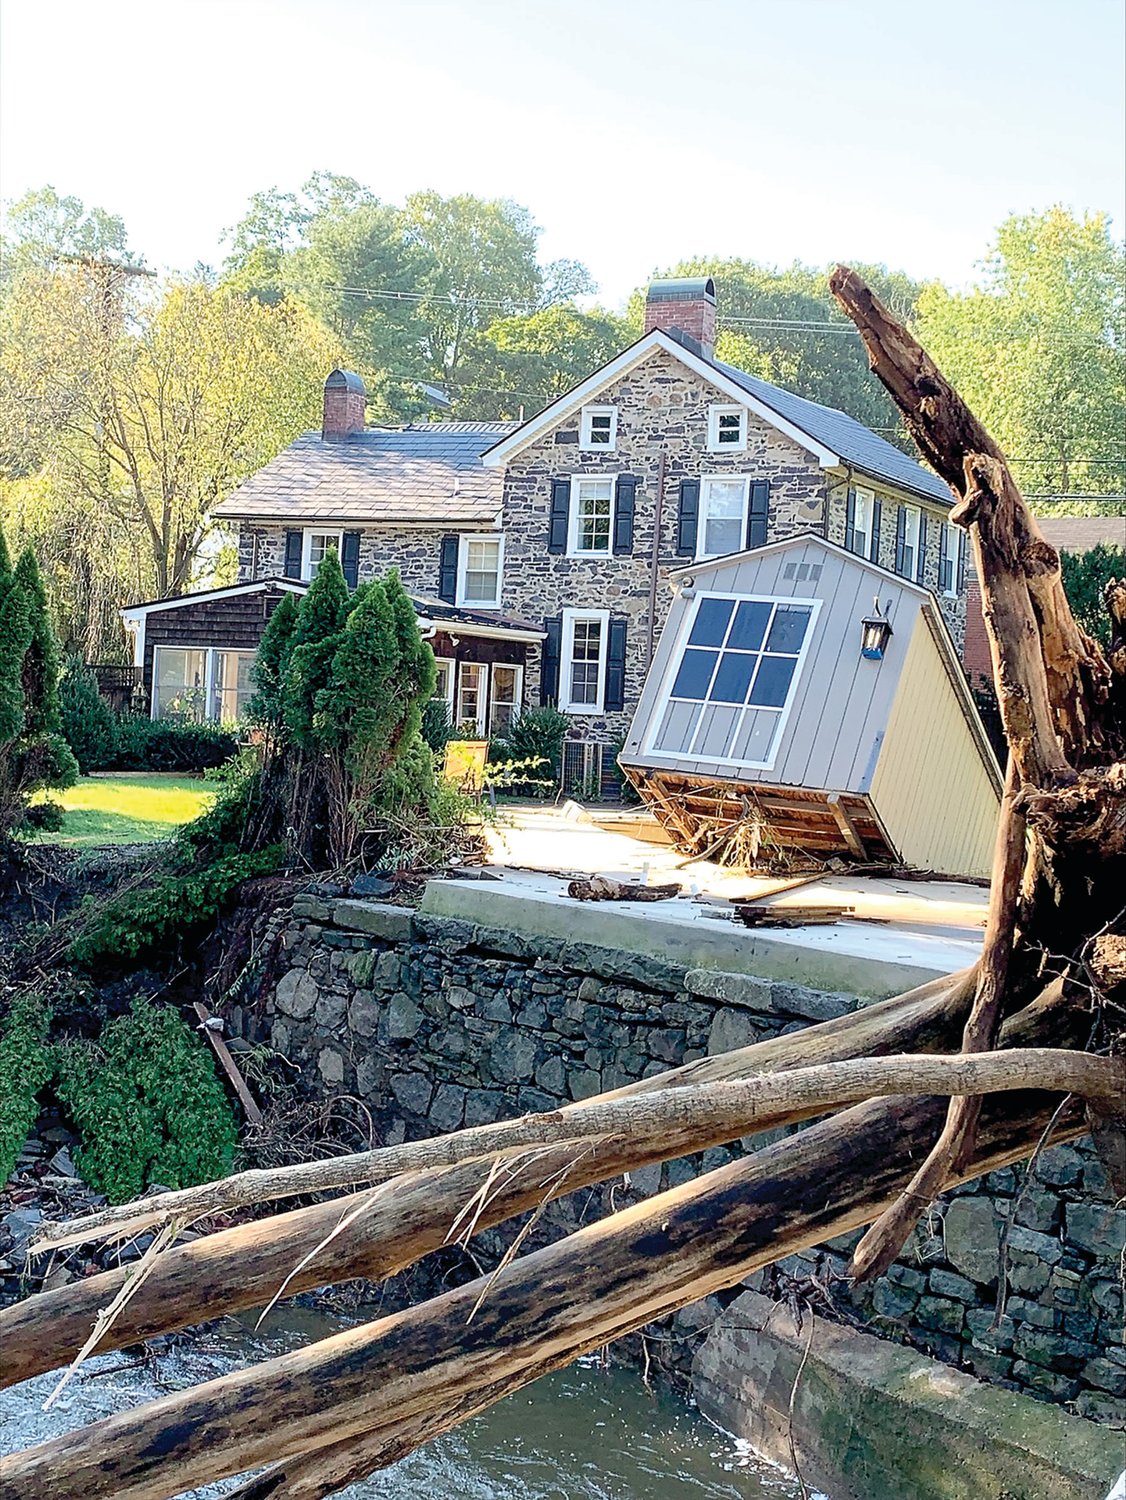 Shed in the pool off South Main Street about to topple into Swan Creek in Lambertville.